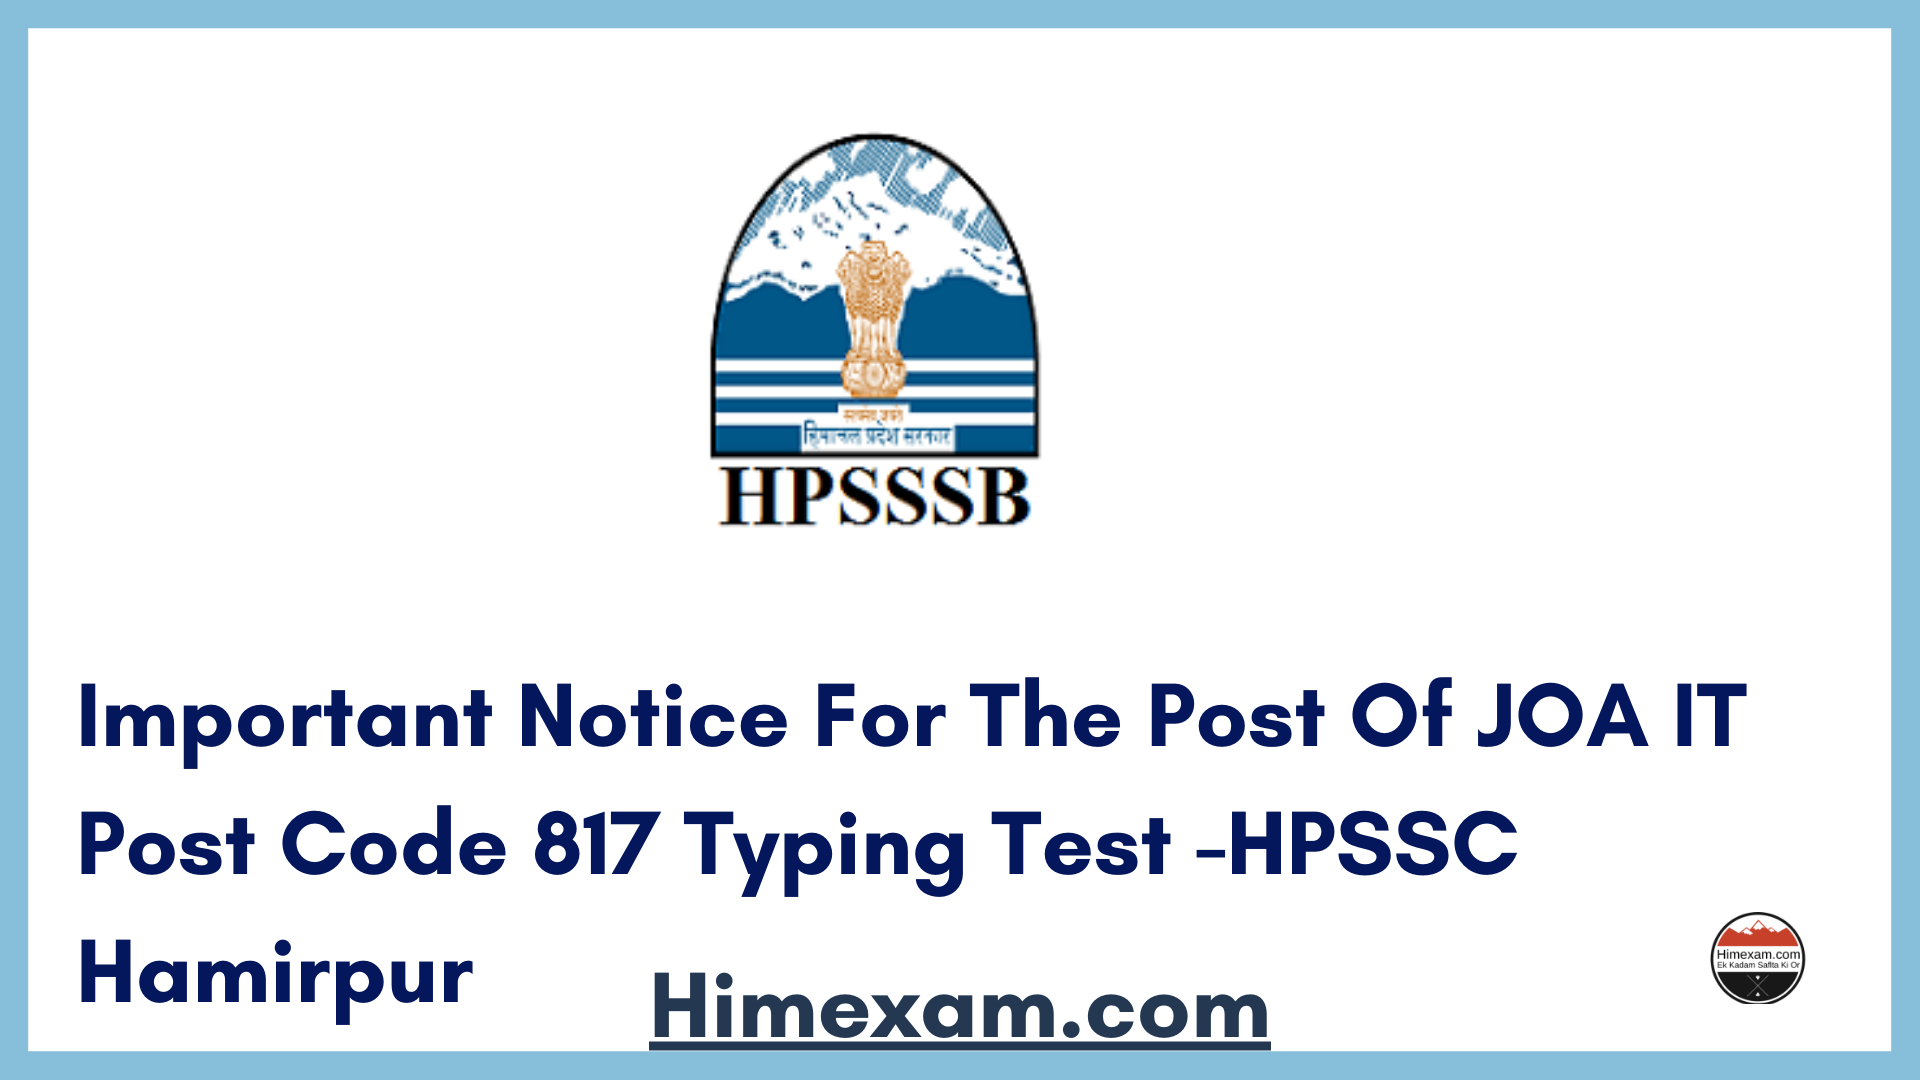 Important Notice For The Post Of JOA IT Post Code 817 Typing Test -HPSSC Hamirpur